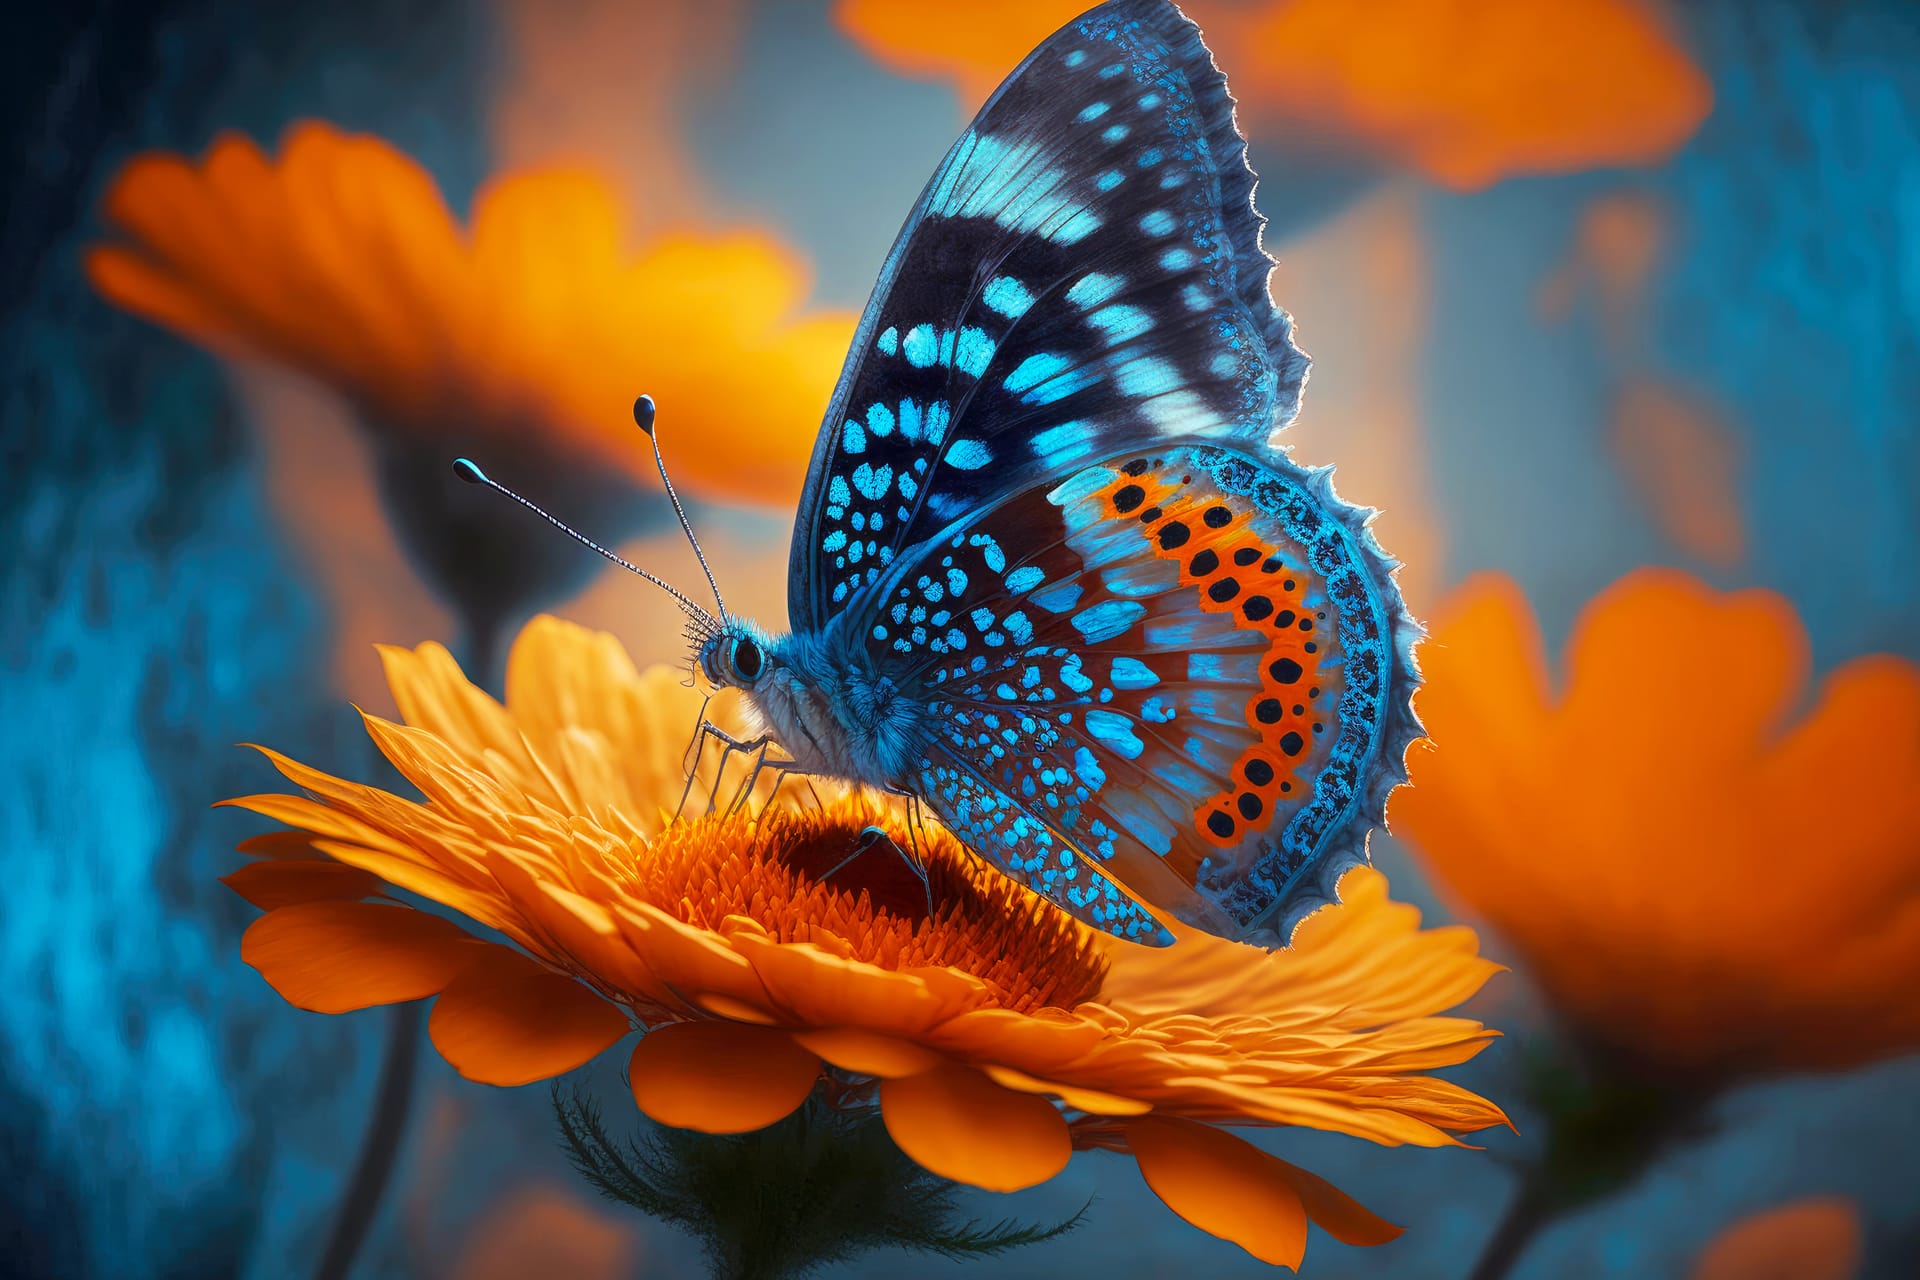 Blue spotted butterfly with orange flower blurred background butterfly image